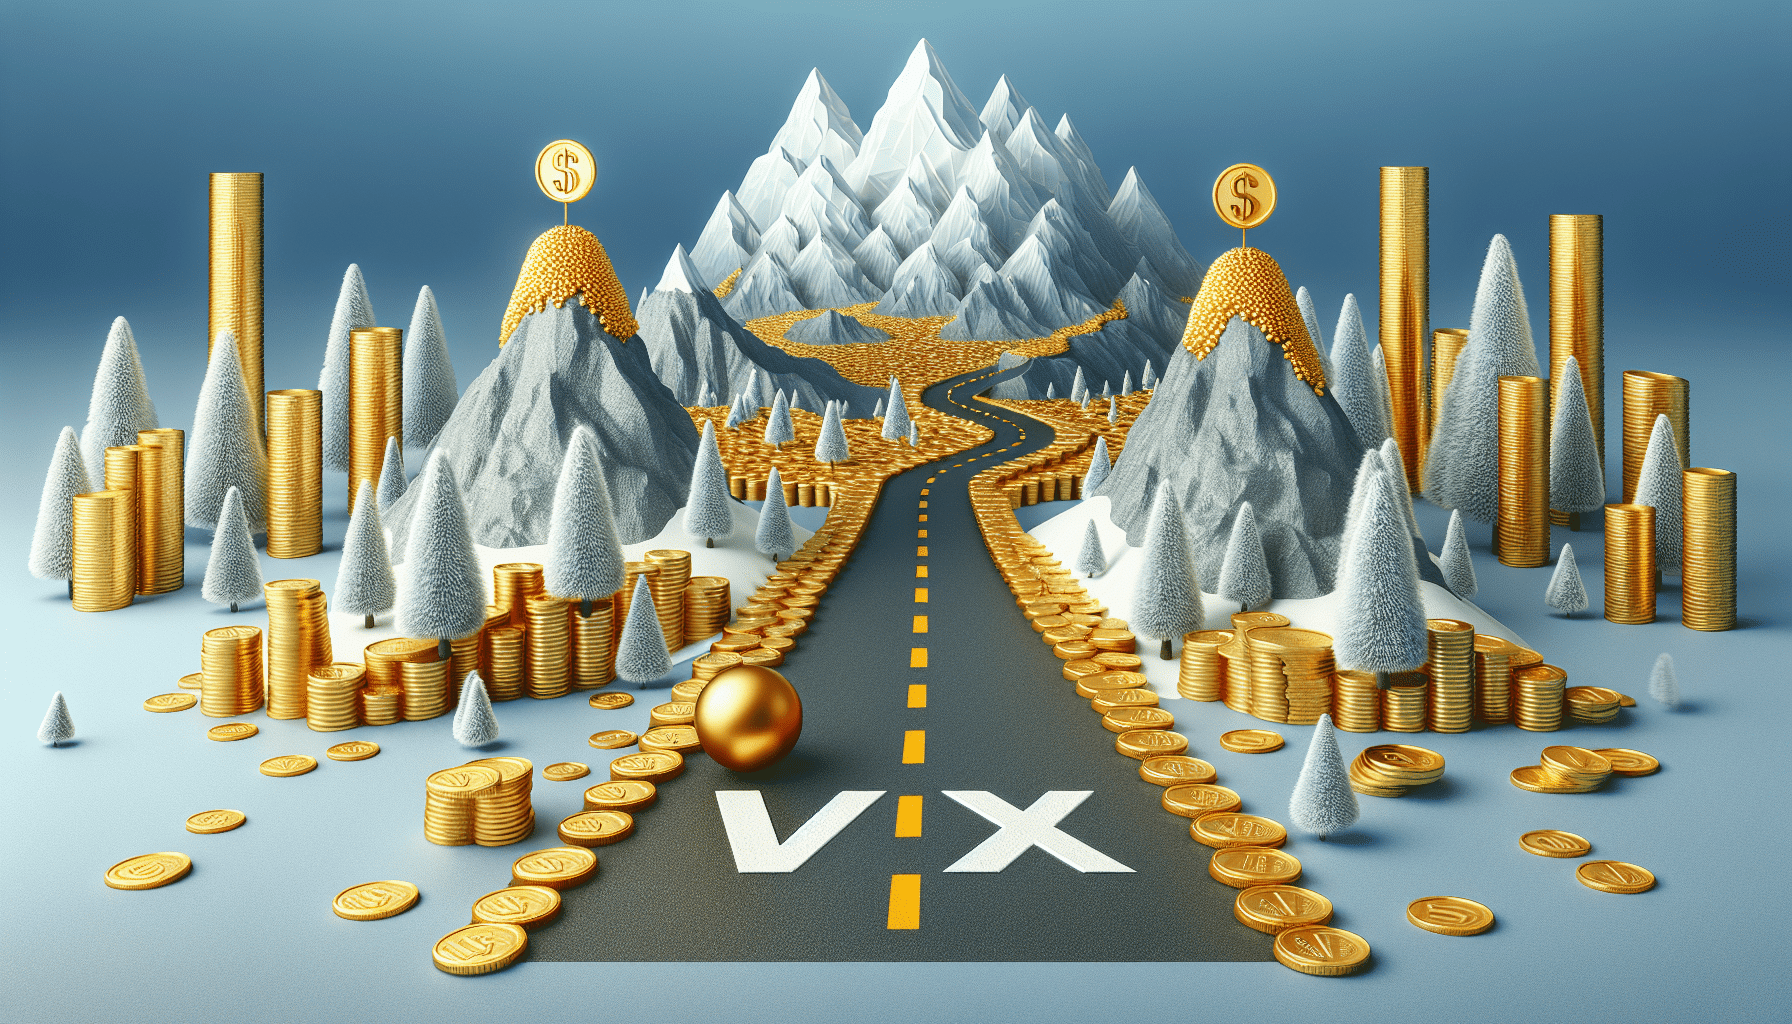 Investing in VFIAX: A Path to Millionaire Status.